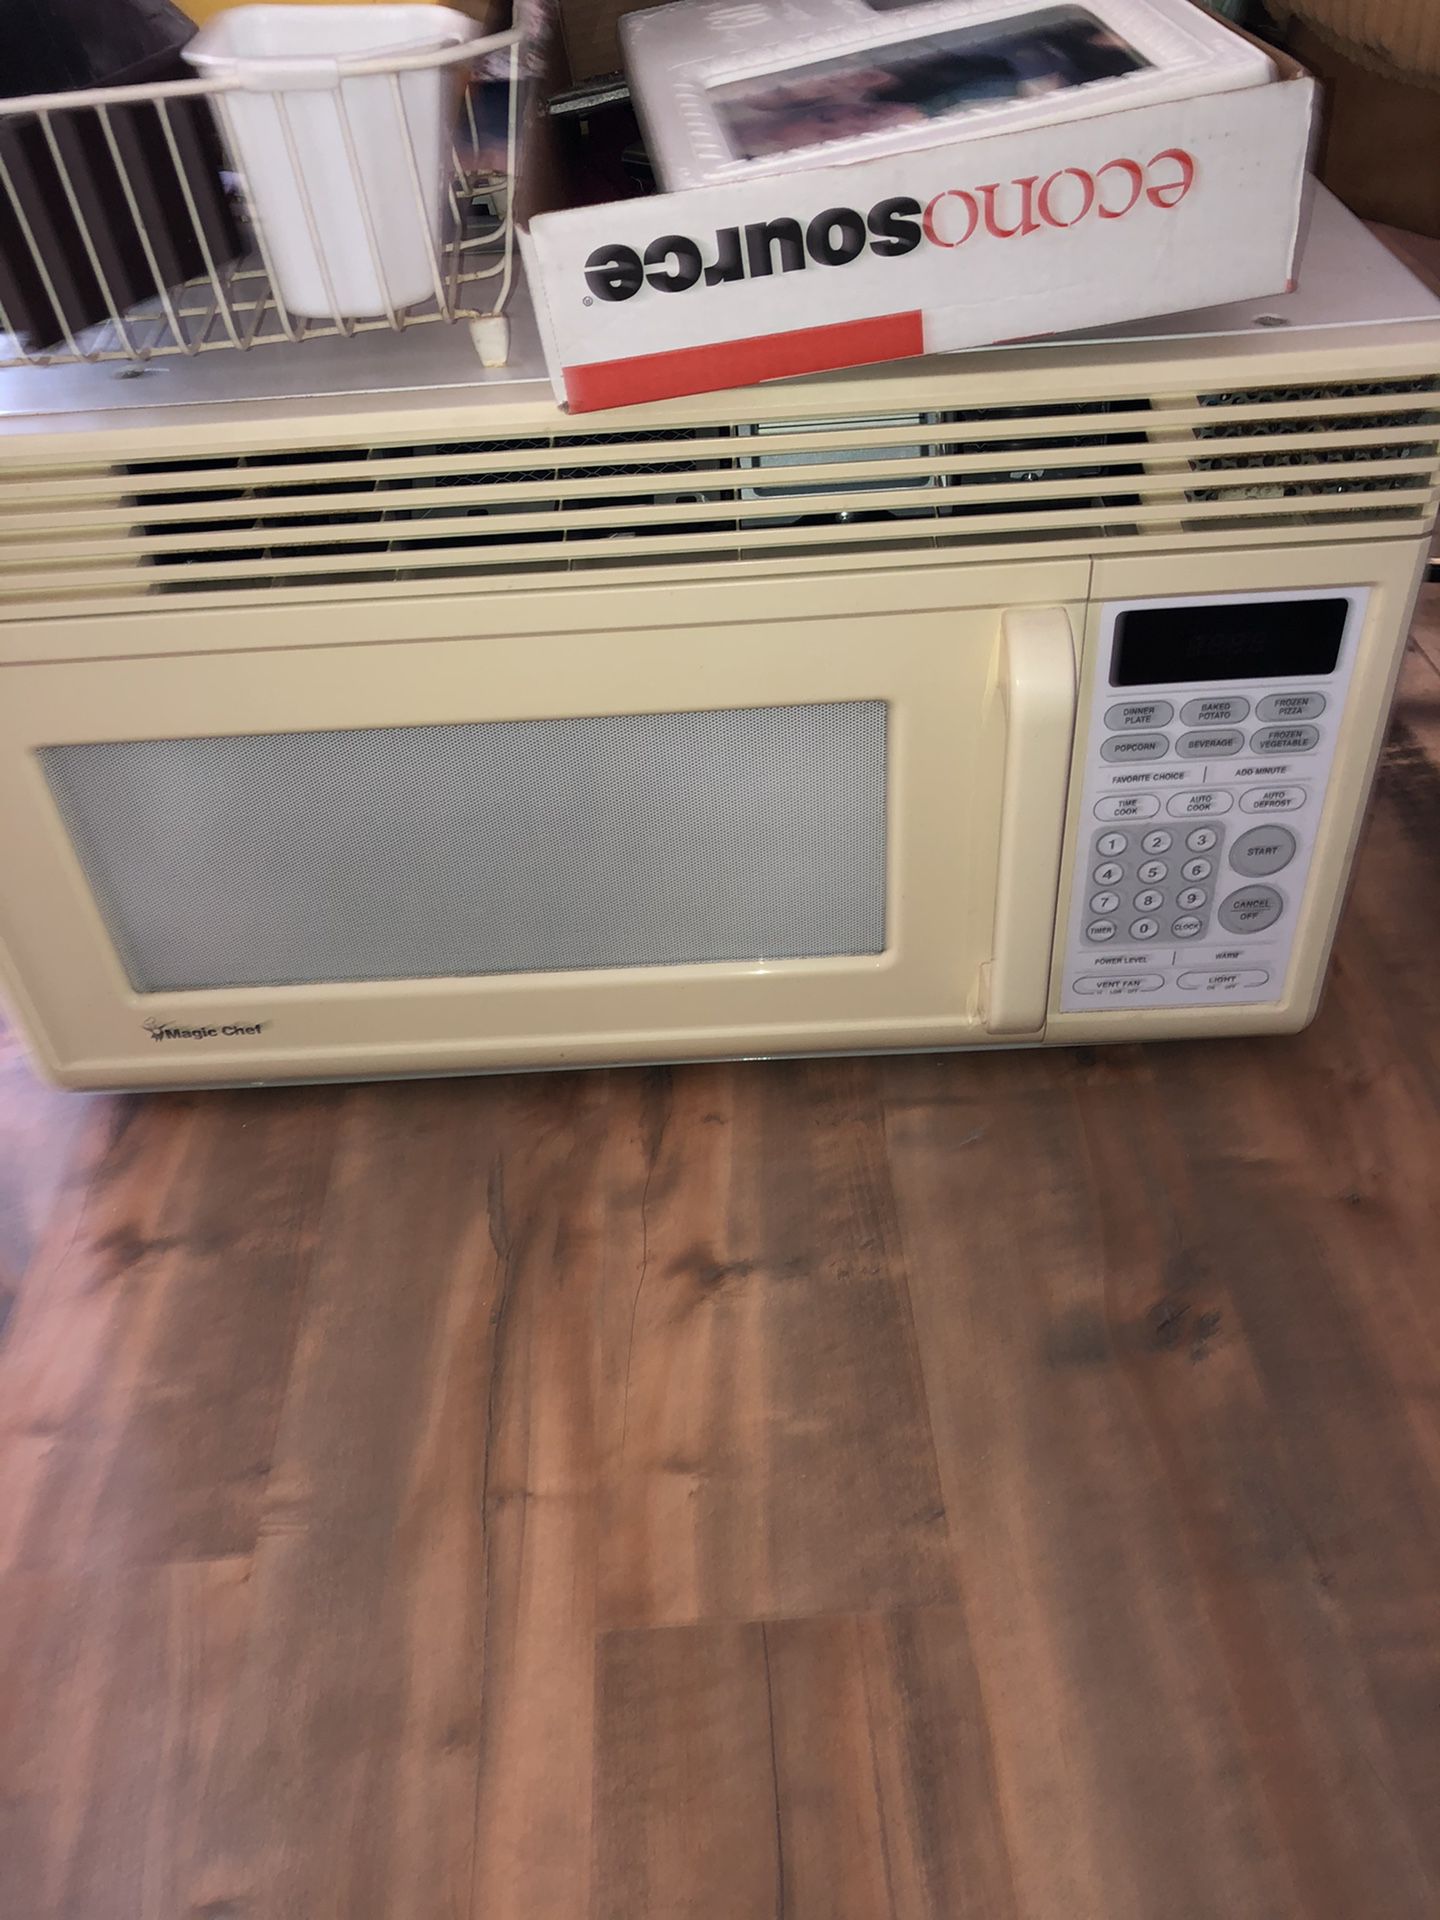 Microwave/vent hood. Over the stove type.